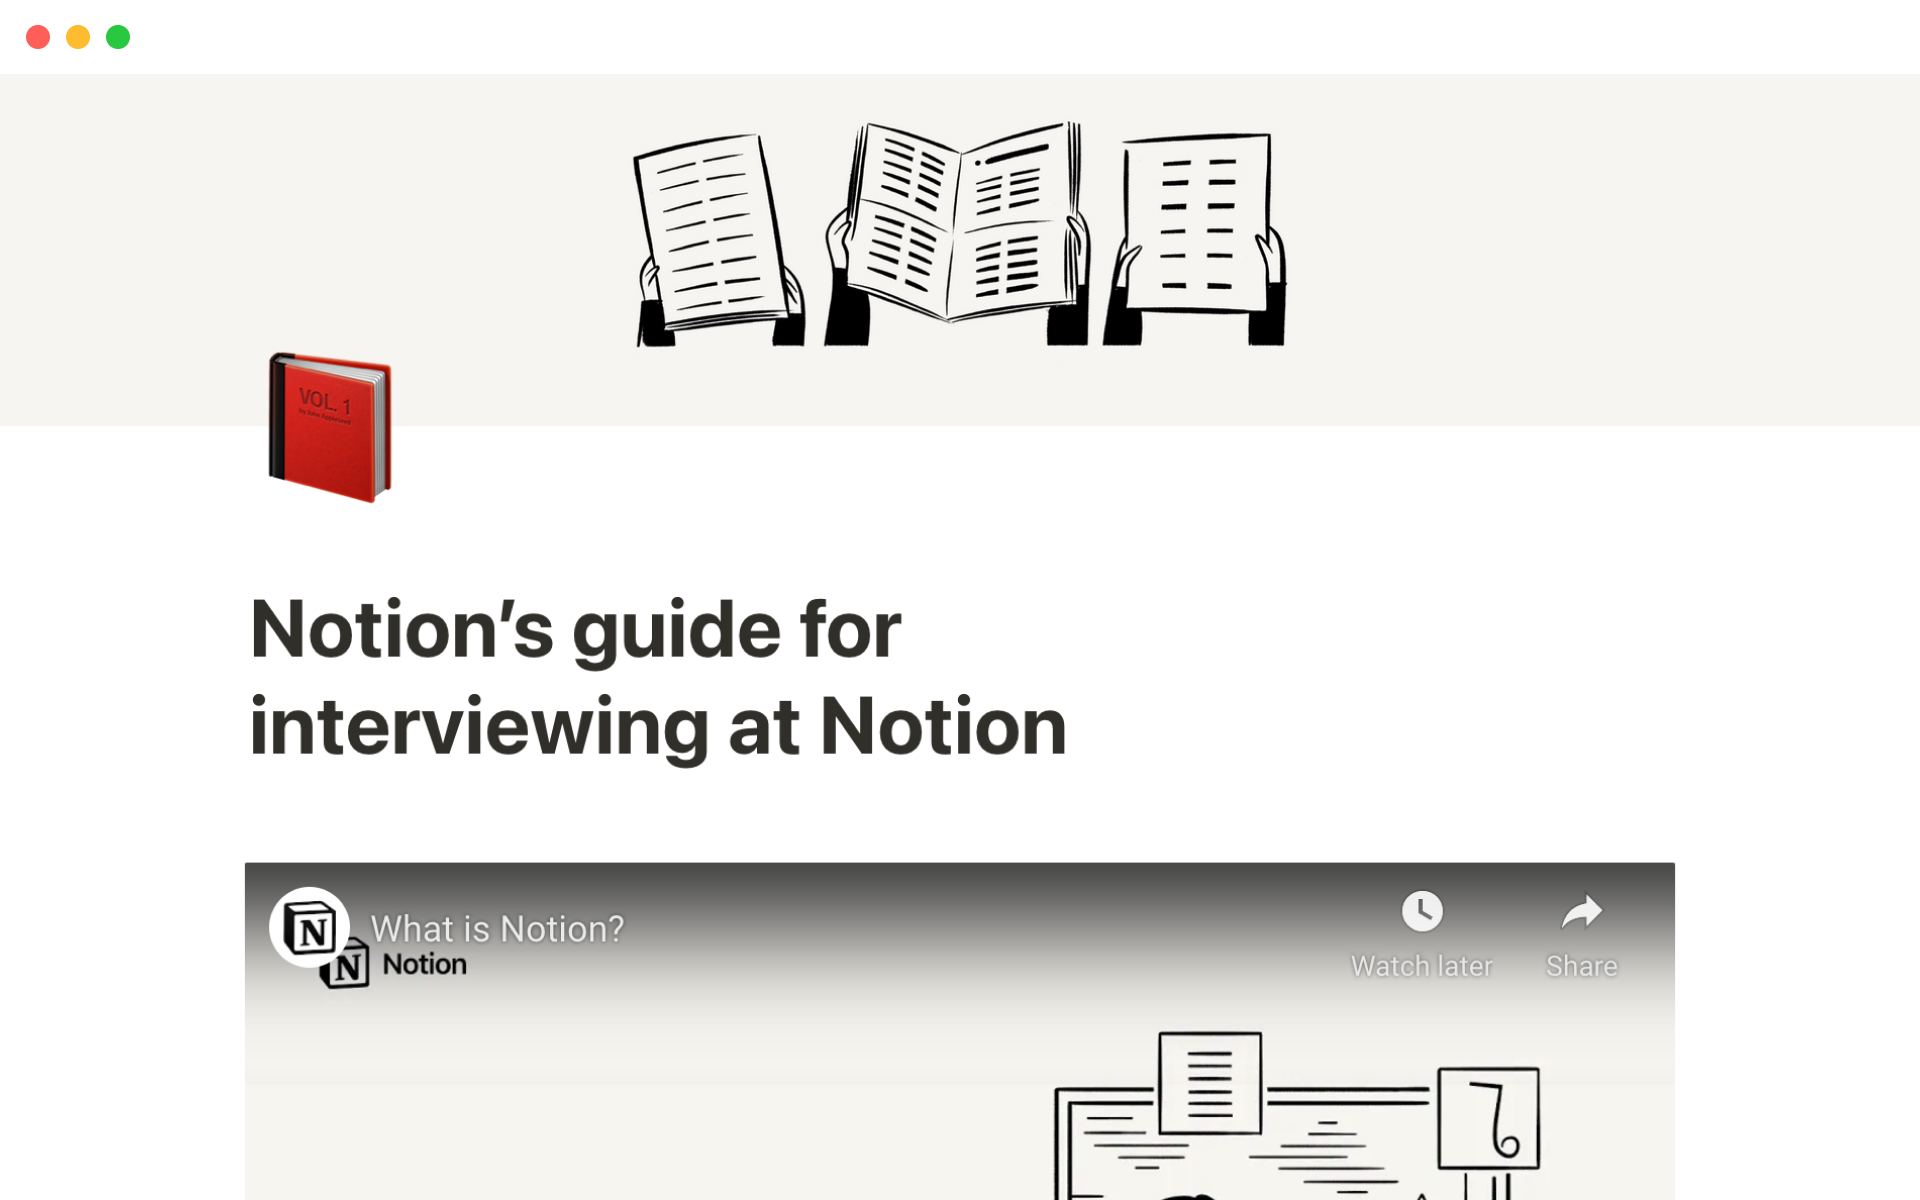 A template preview for Notion’s guide for interviewing at Notion